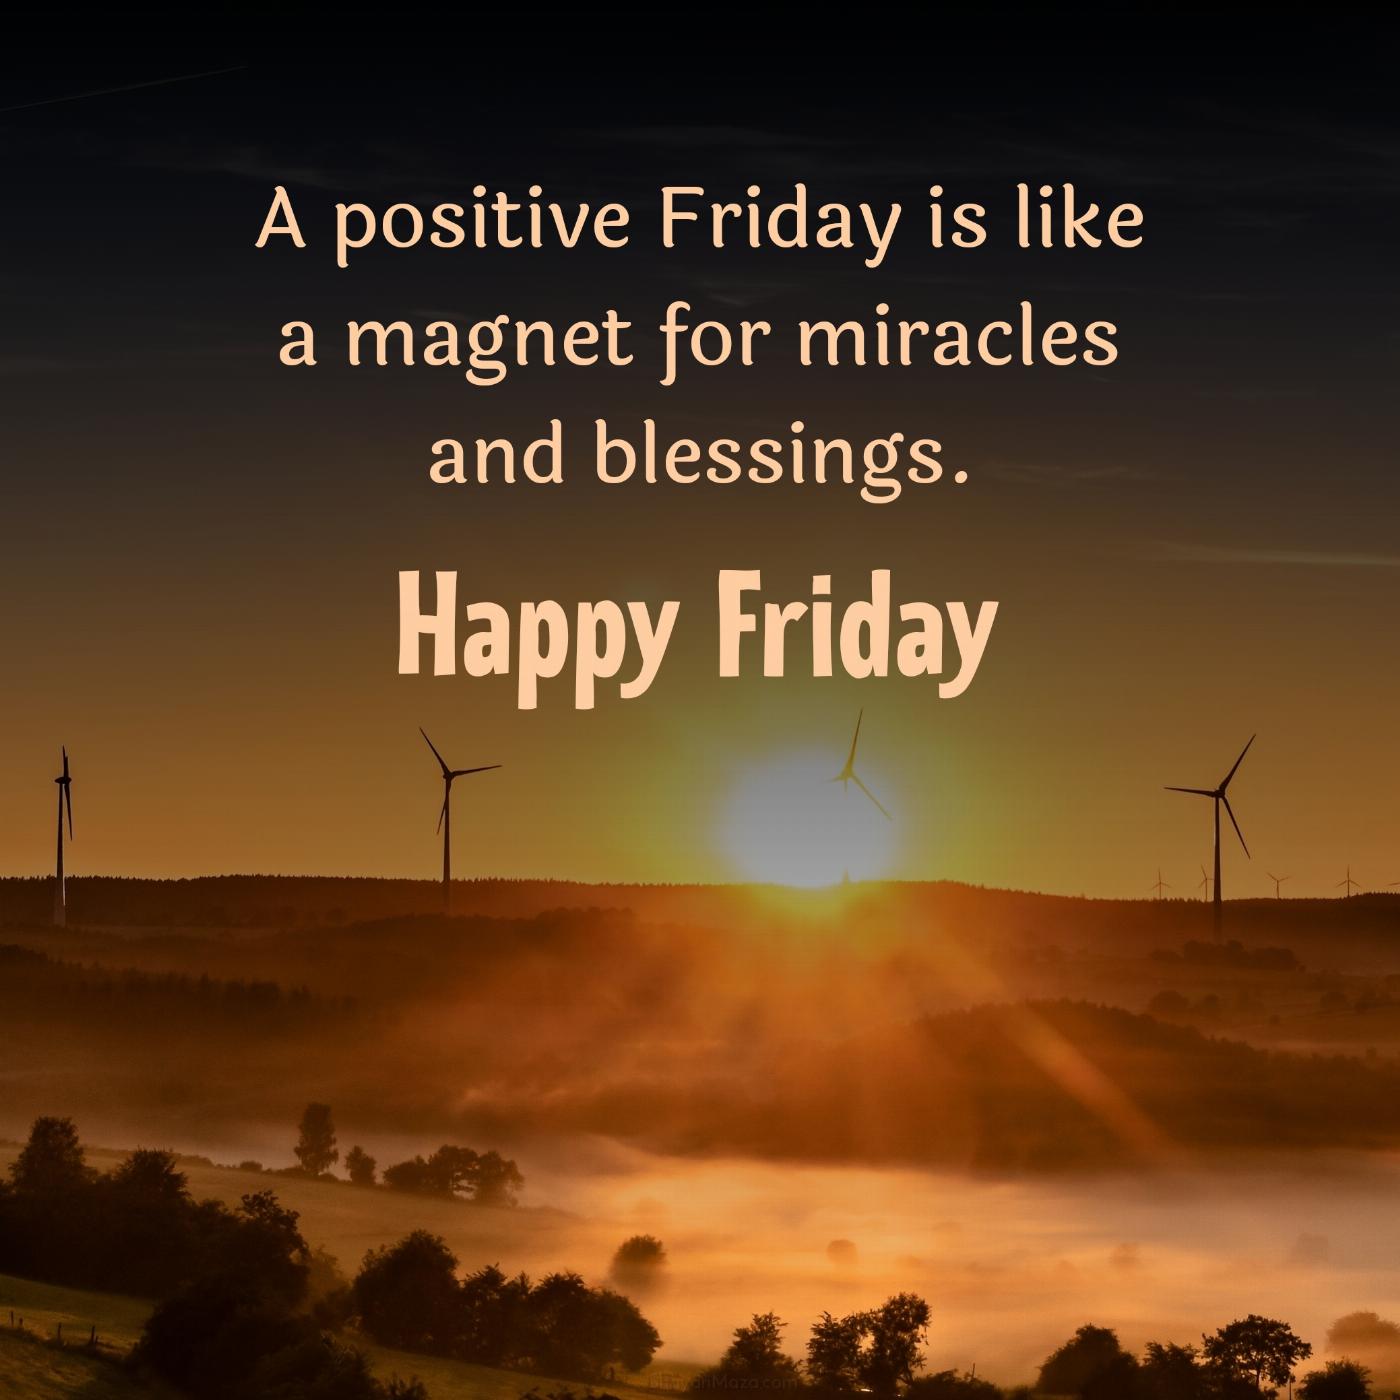 A positive Friday is like a magnet for miracles and blessings